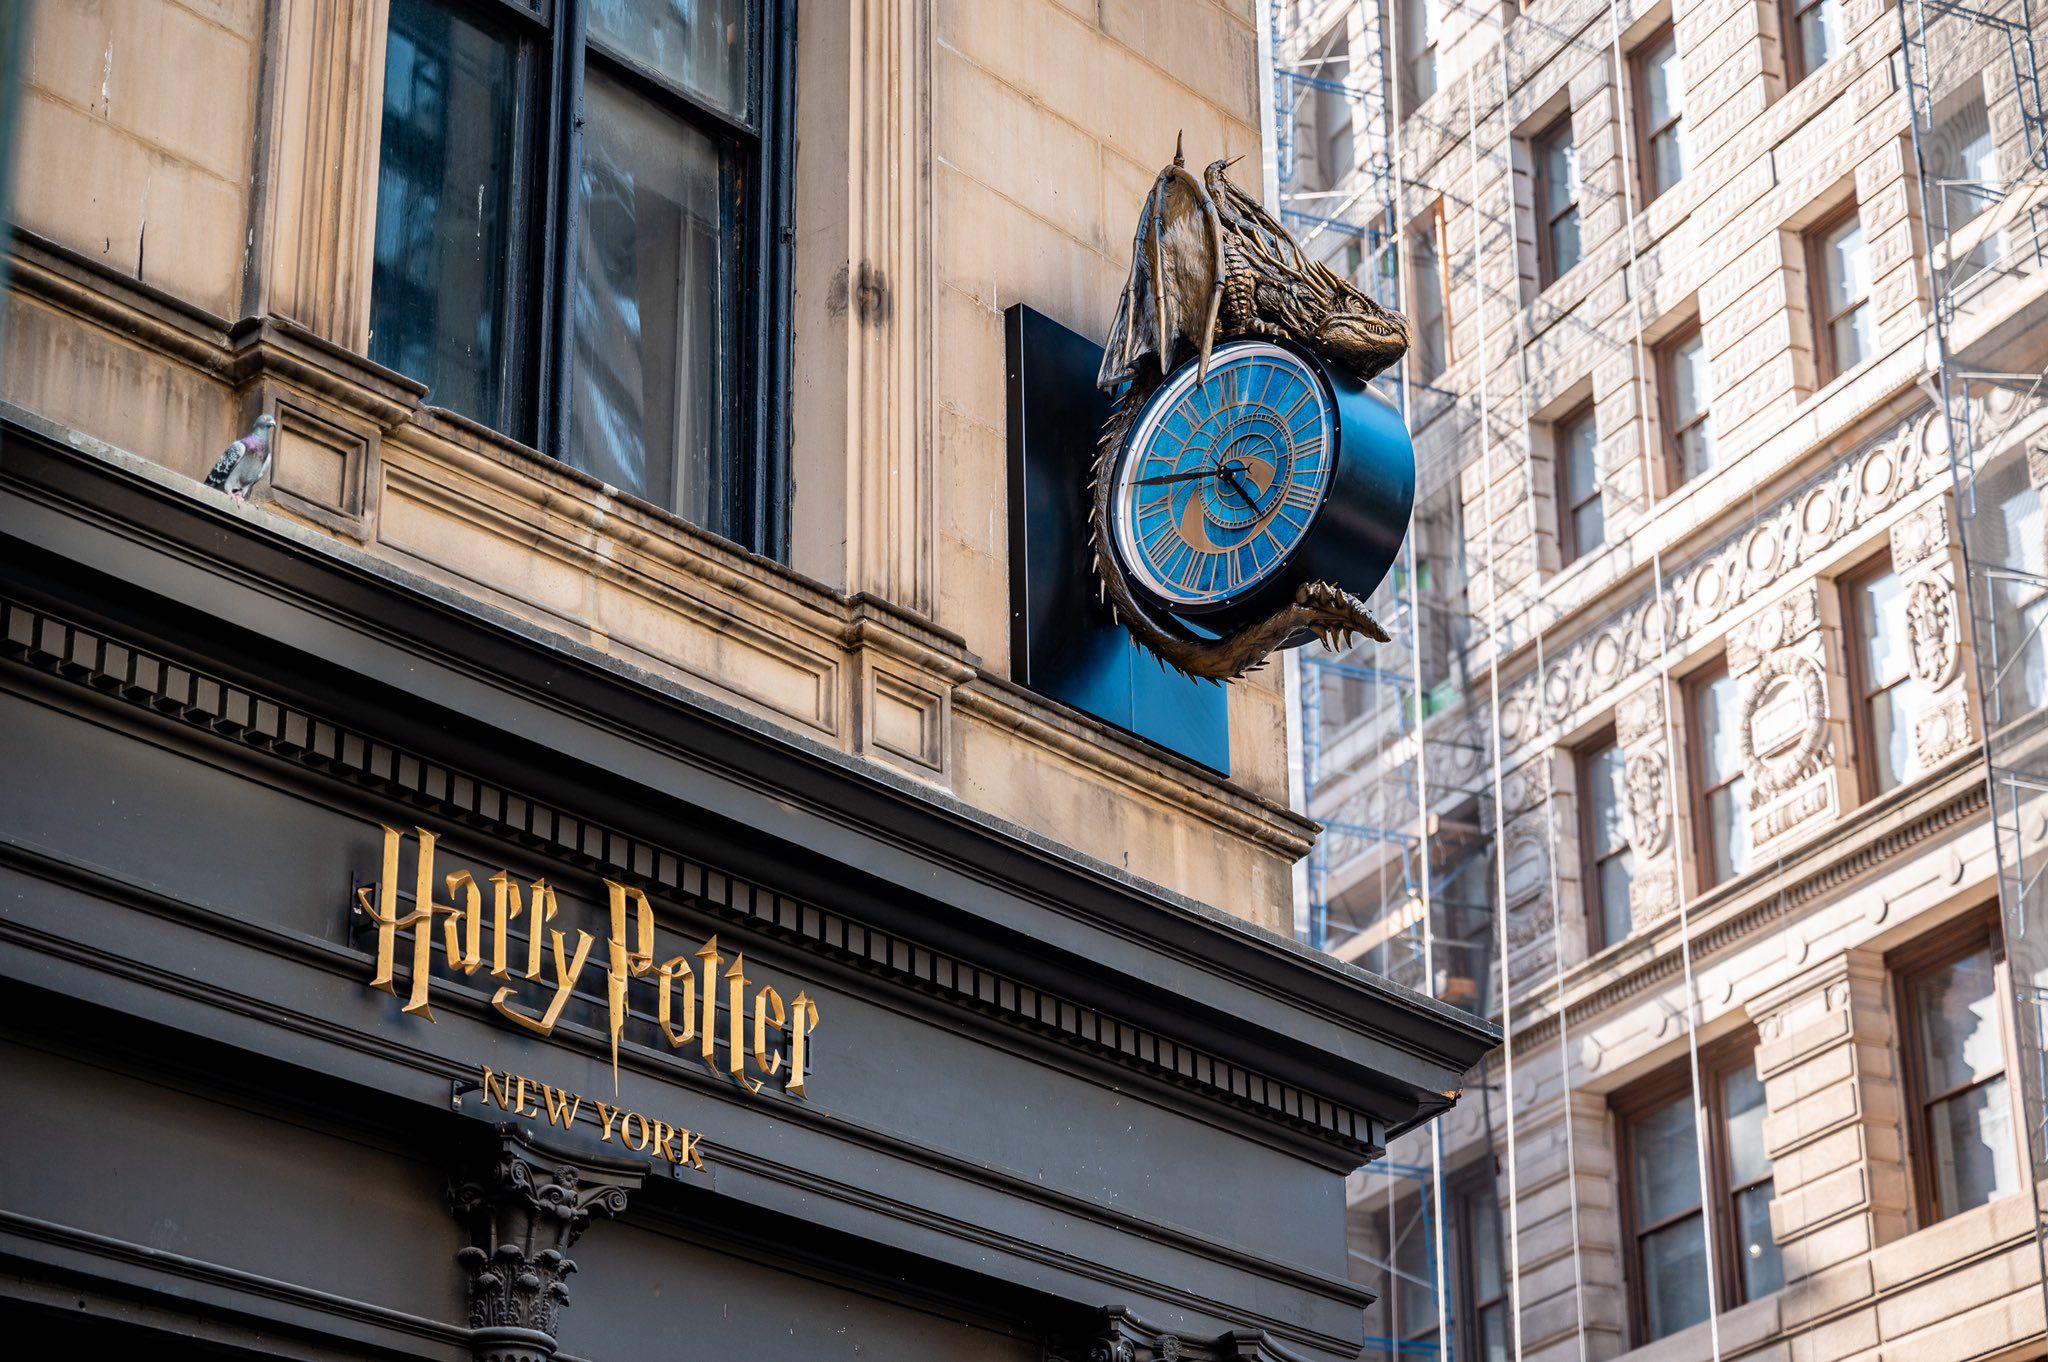 10 points to New York for opening new Harry Potter store for muggles